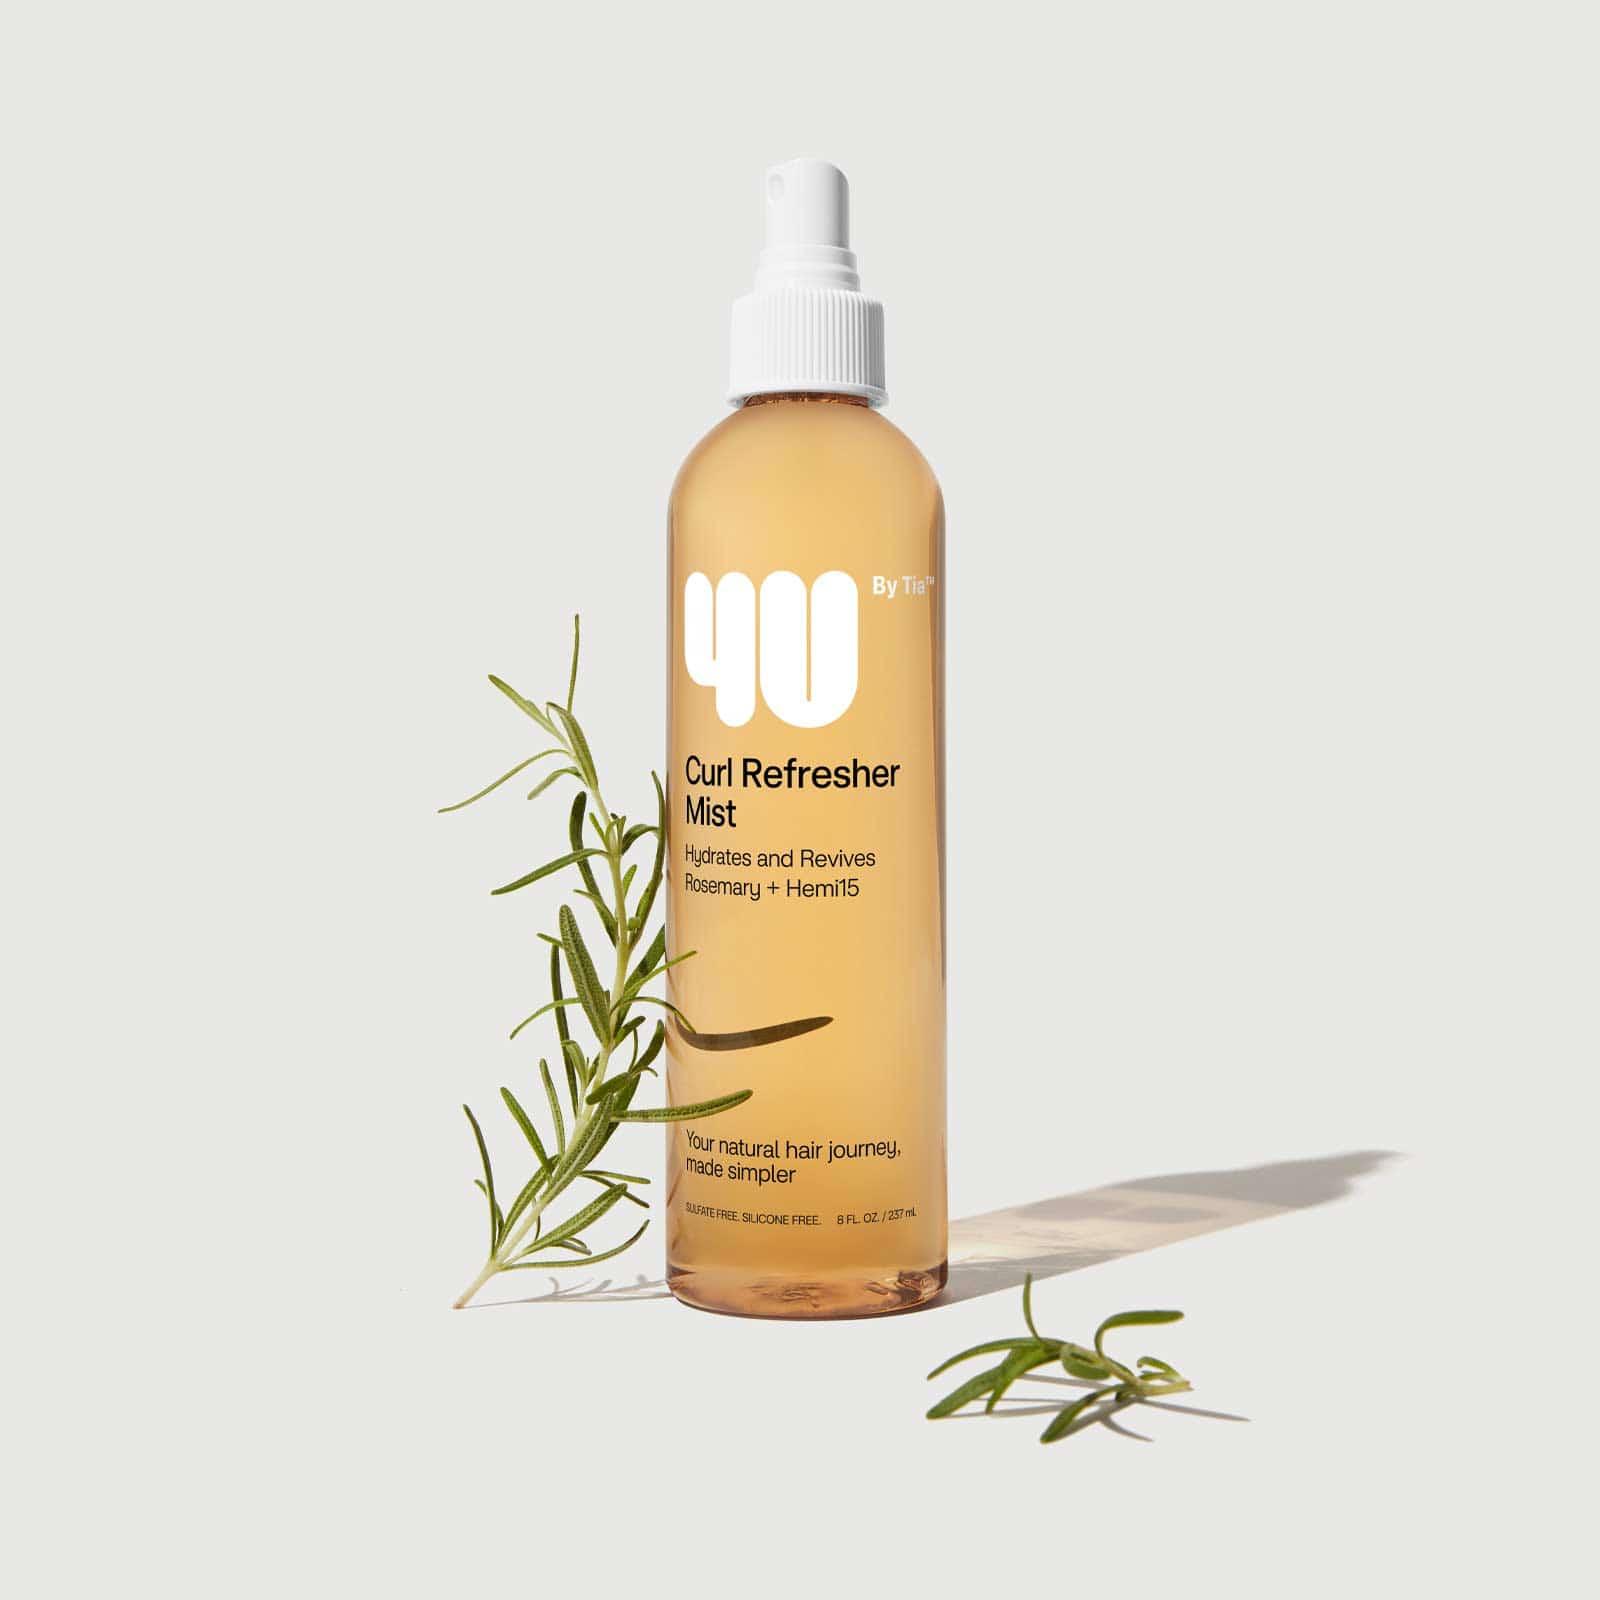 Curl Refresher Mist with rosemary